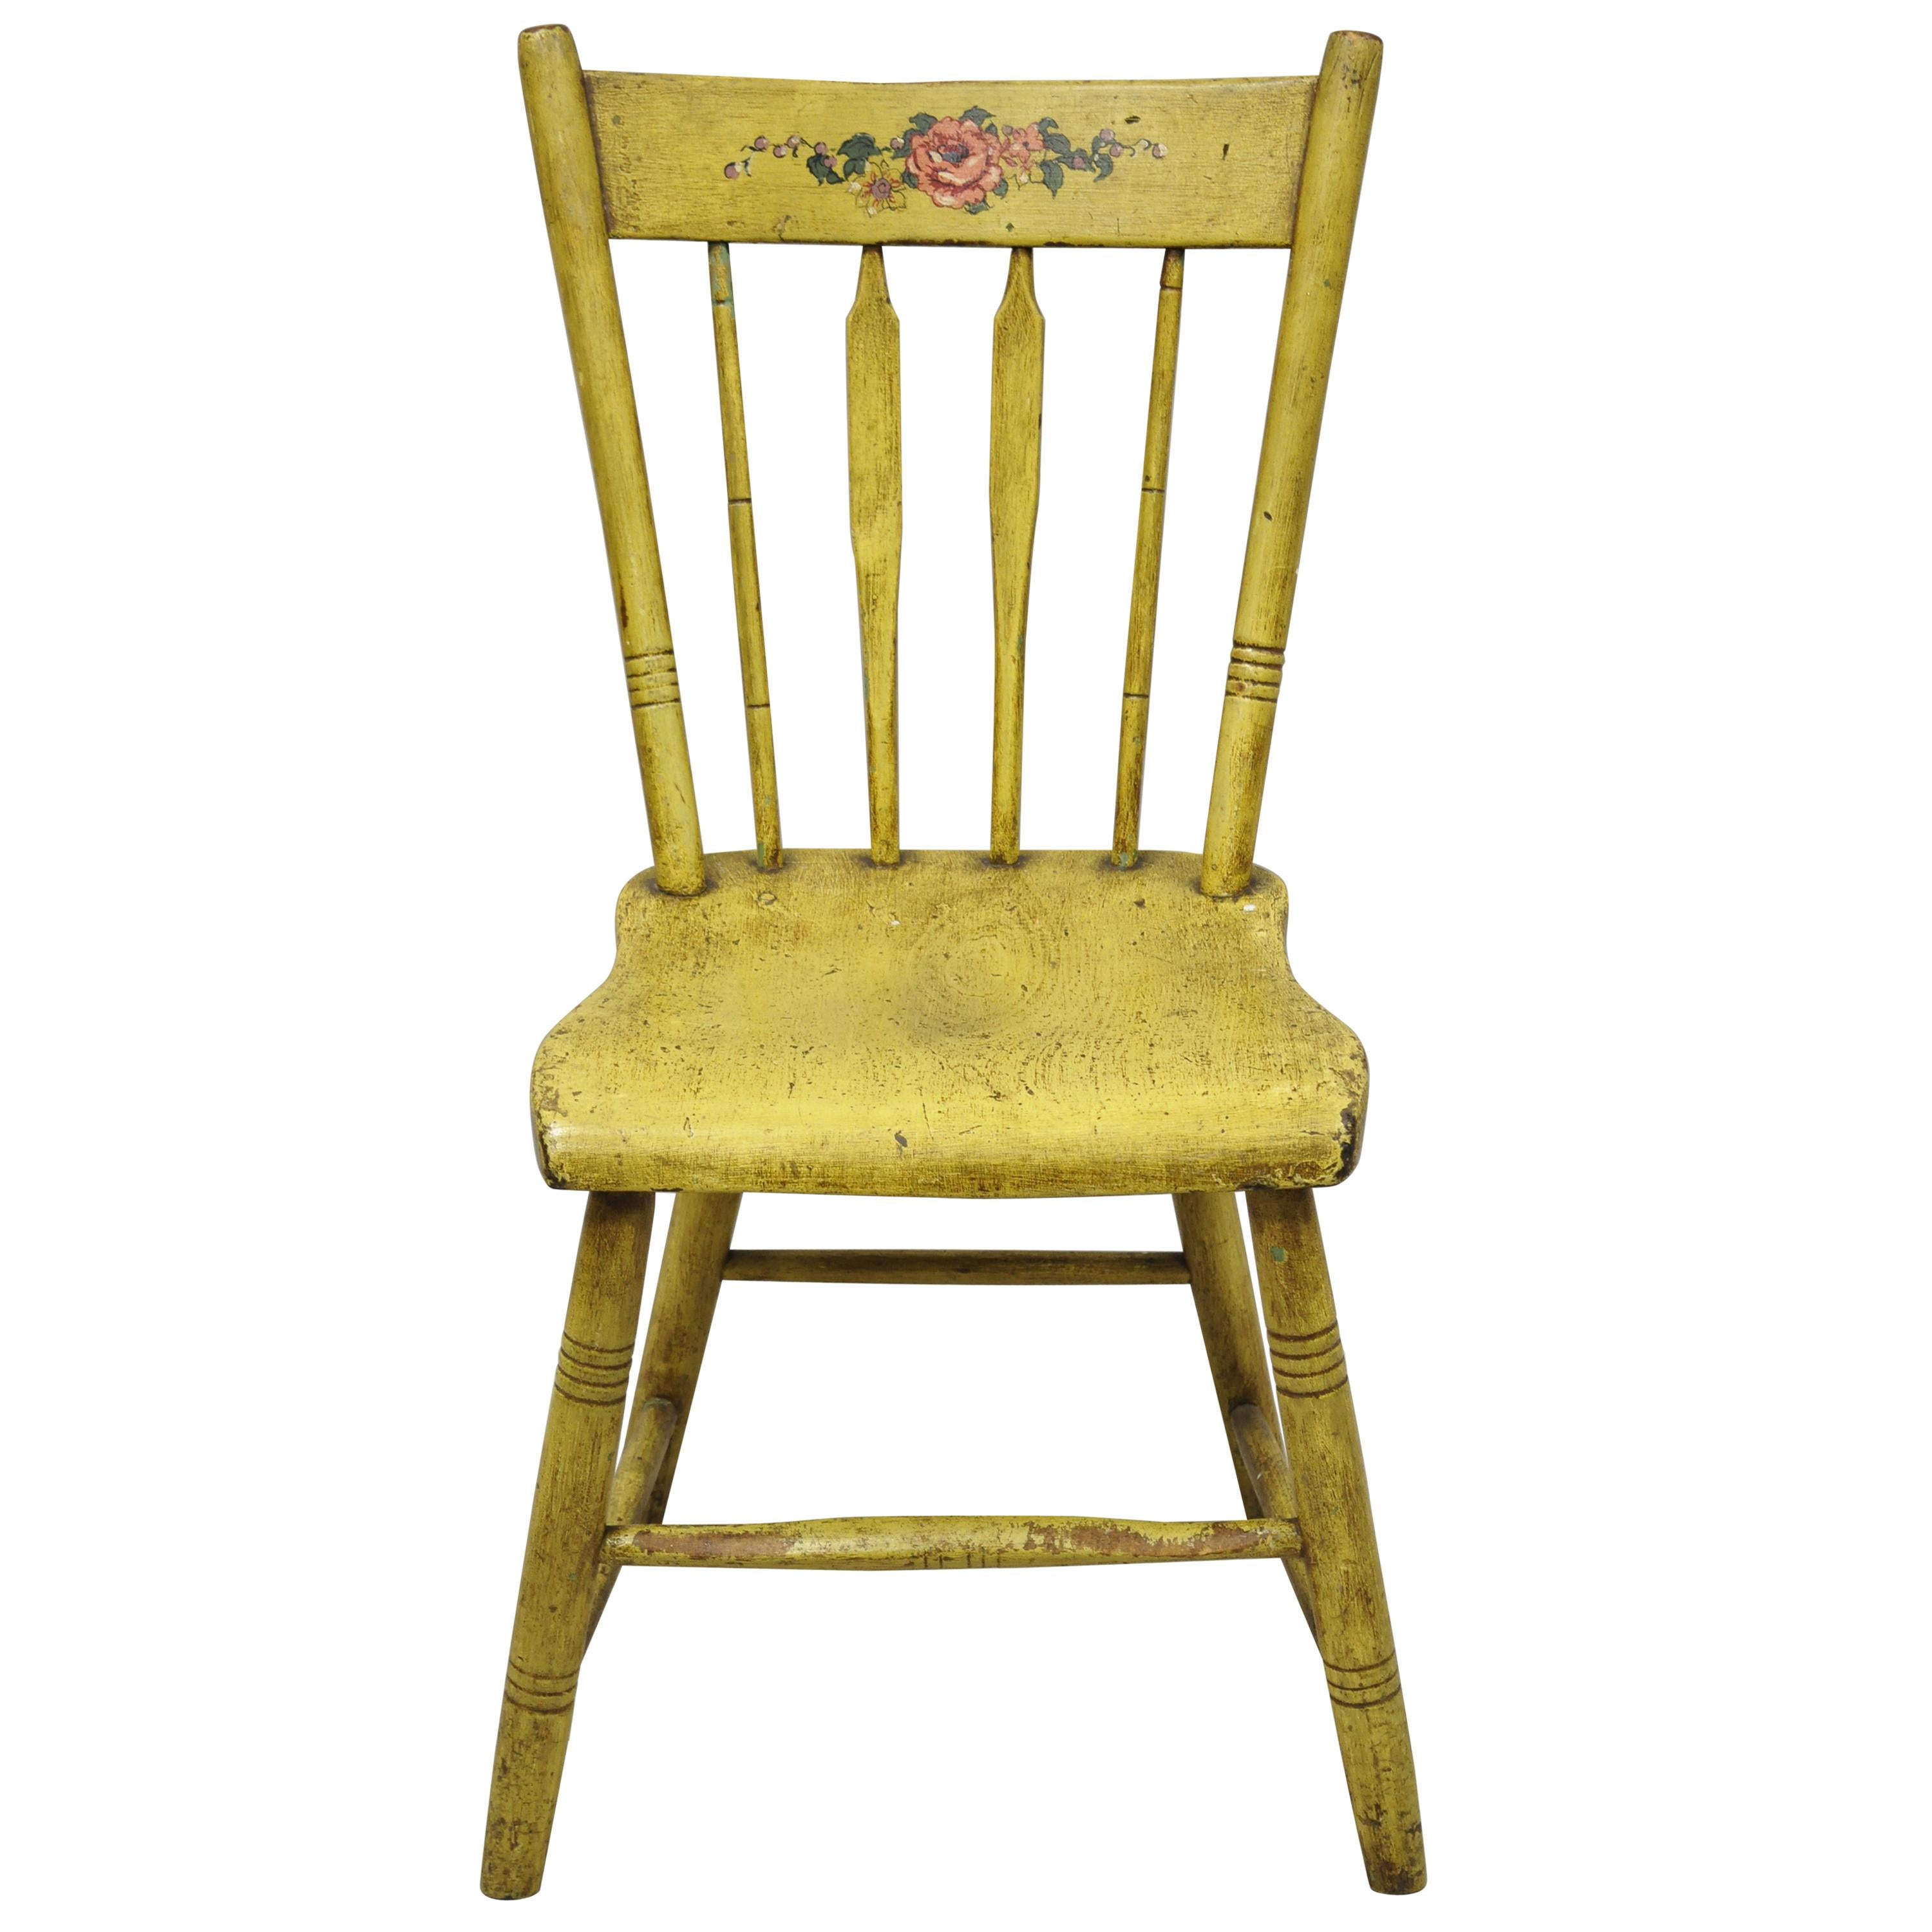 Frederick Loeser & Co Yellow American Primitive Hitchcock Painted Side Chair 'A' For Sale